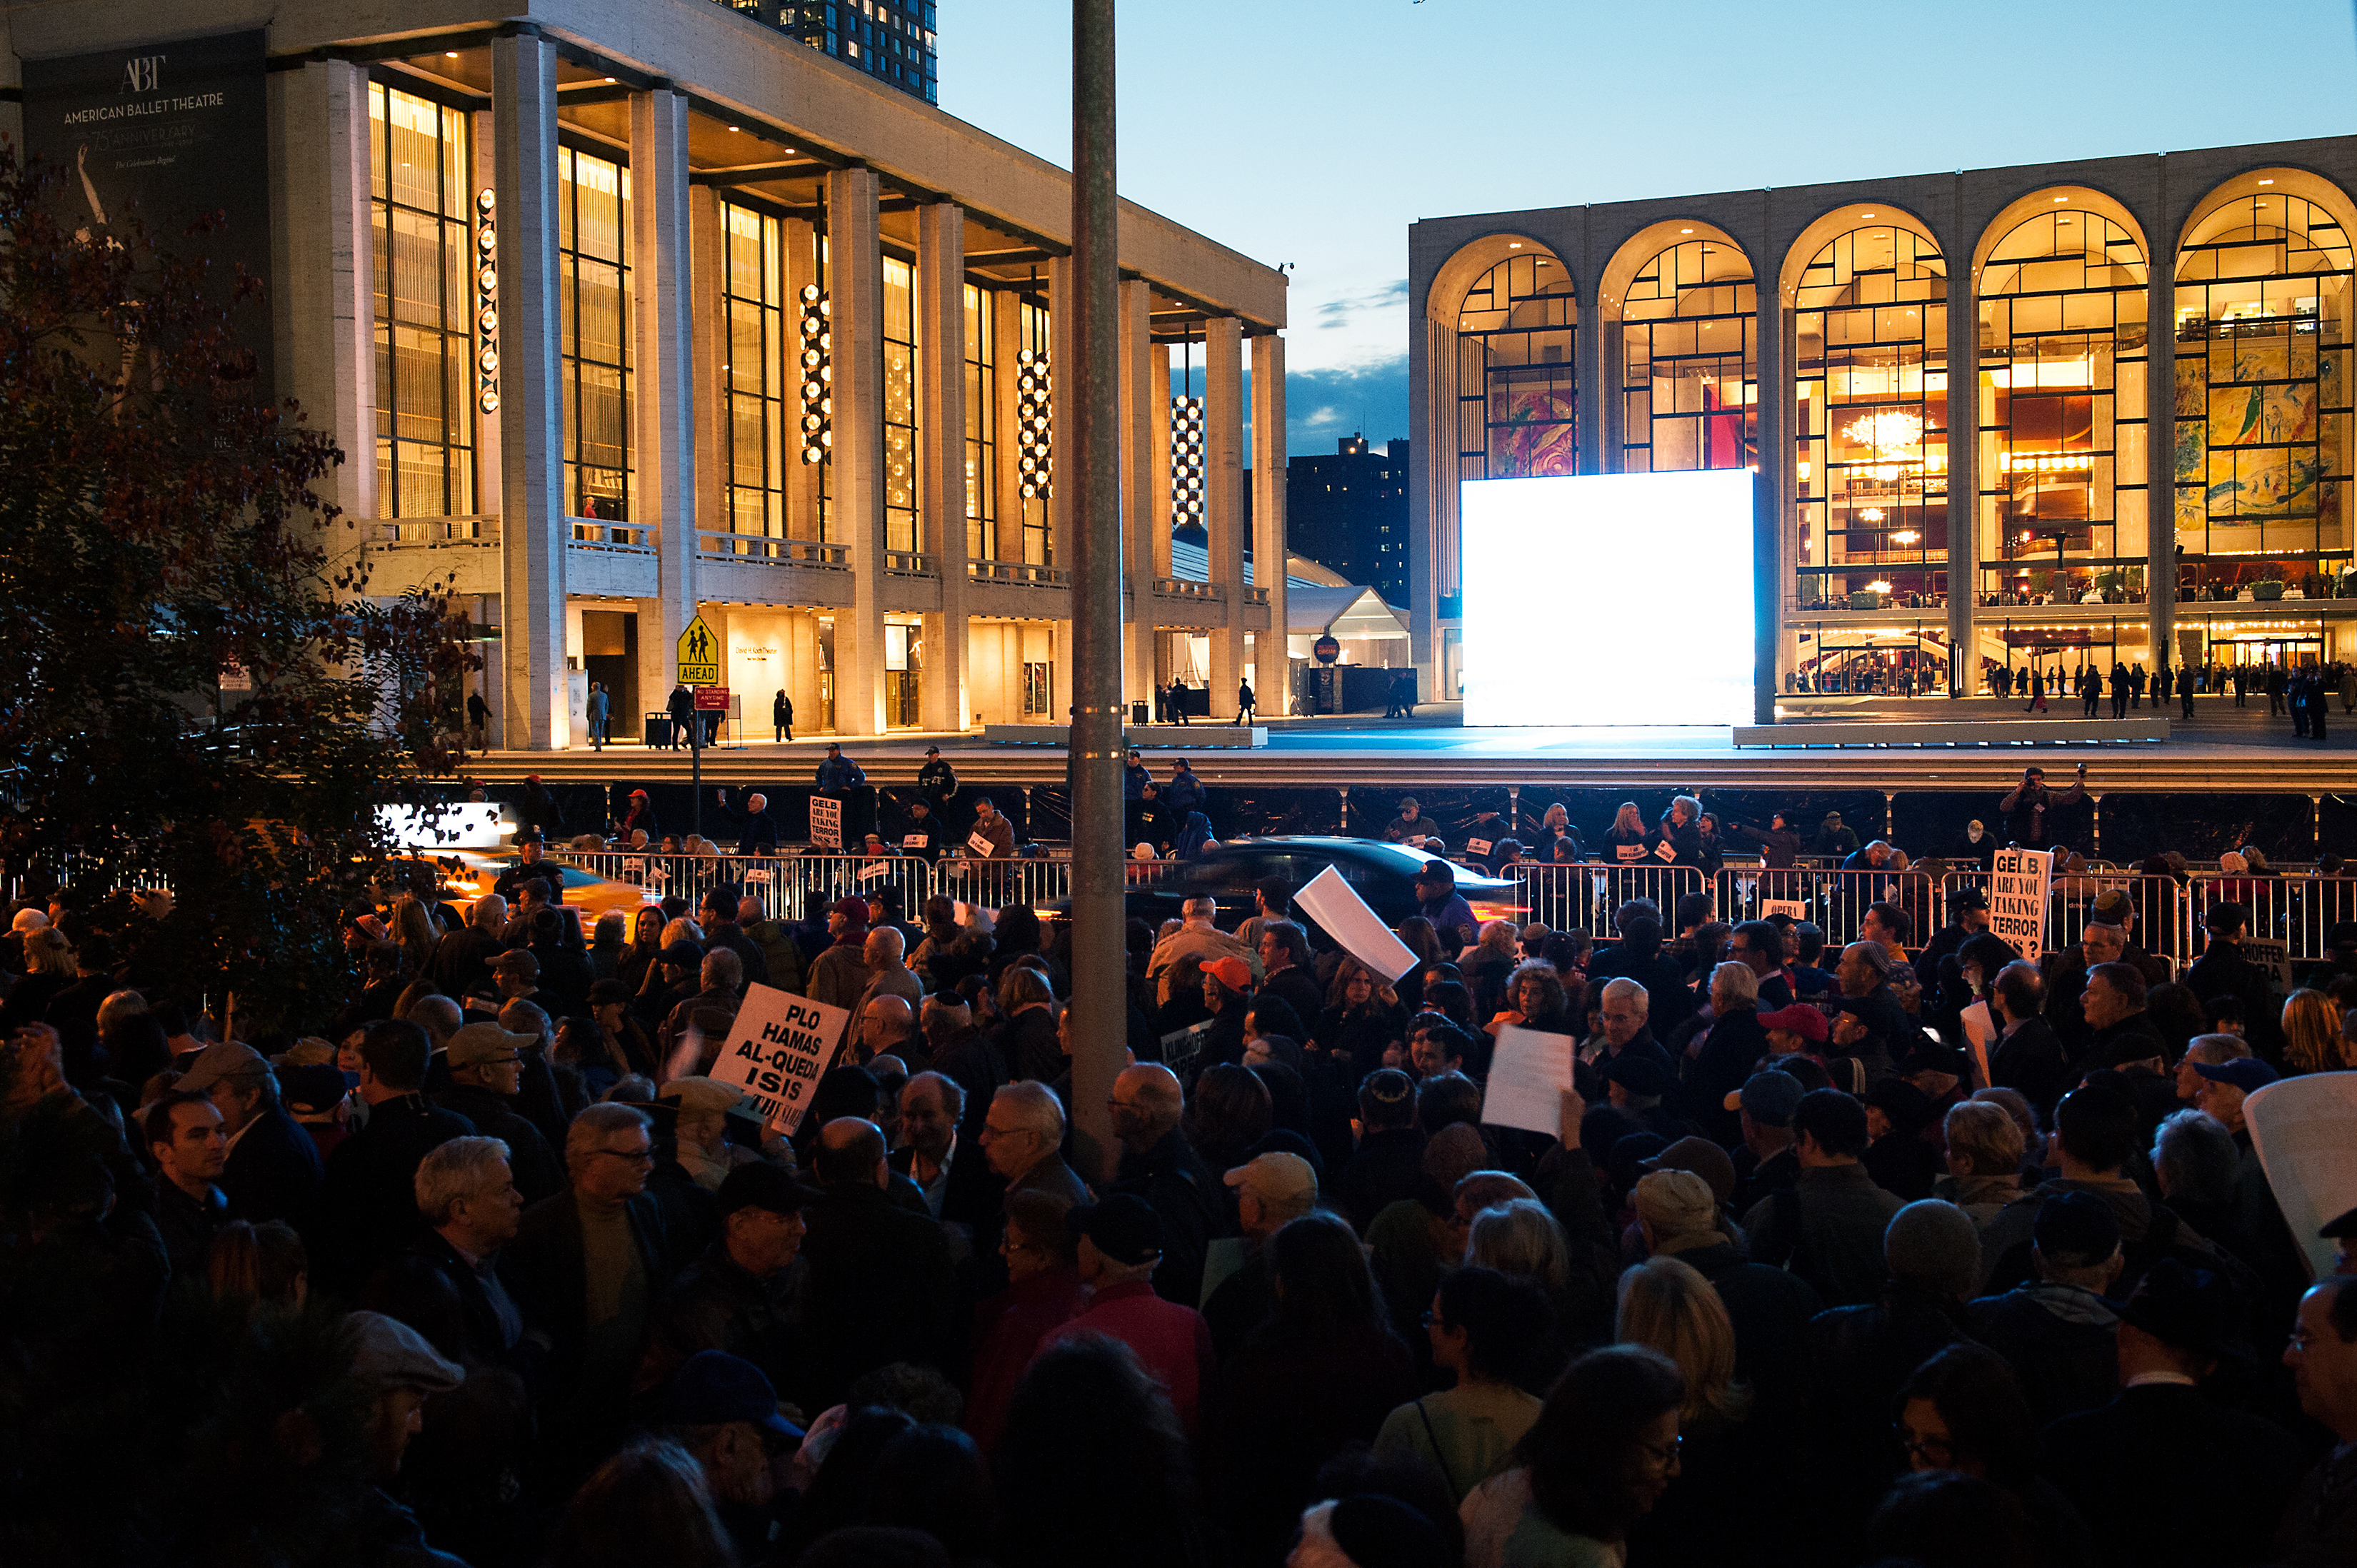 Protestors hold signs outside the Metropolitan Opera at Lincoln Center on opening night of the opera, "The Death of Klinghoffer" on October 20, 2014 in New York City. The opera has been accused of anti-Semitism and, at its opening tonight, demonstrators, including former New York City Mayor Rudy Giuliani, protested its inclusion in this year's schedule at the Metropolitan Opera.